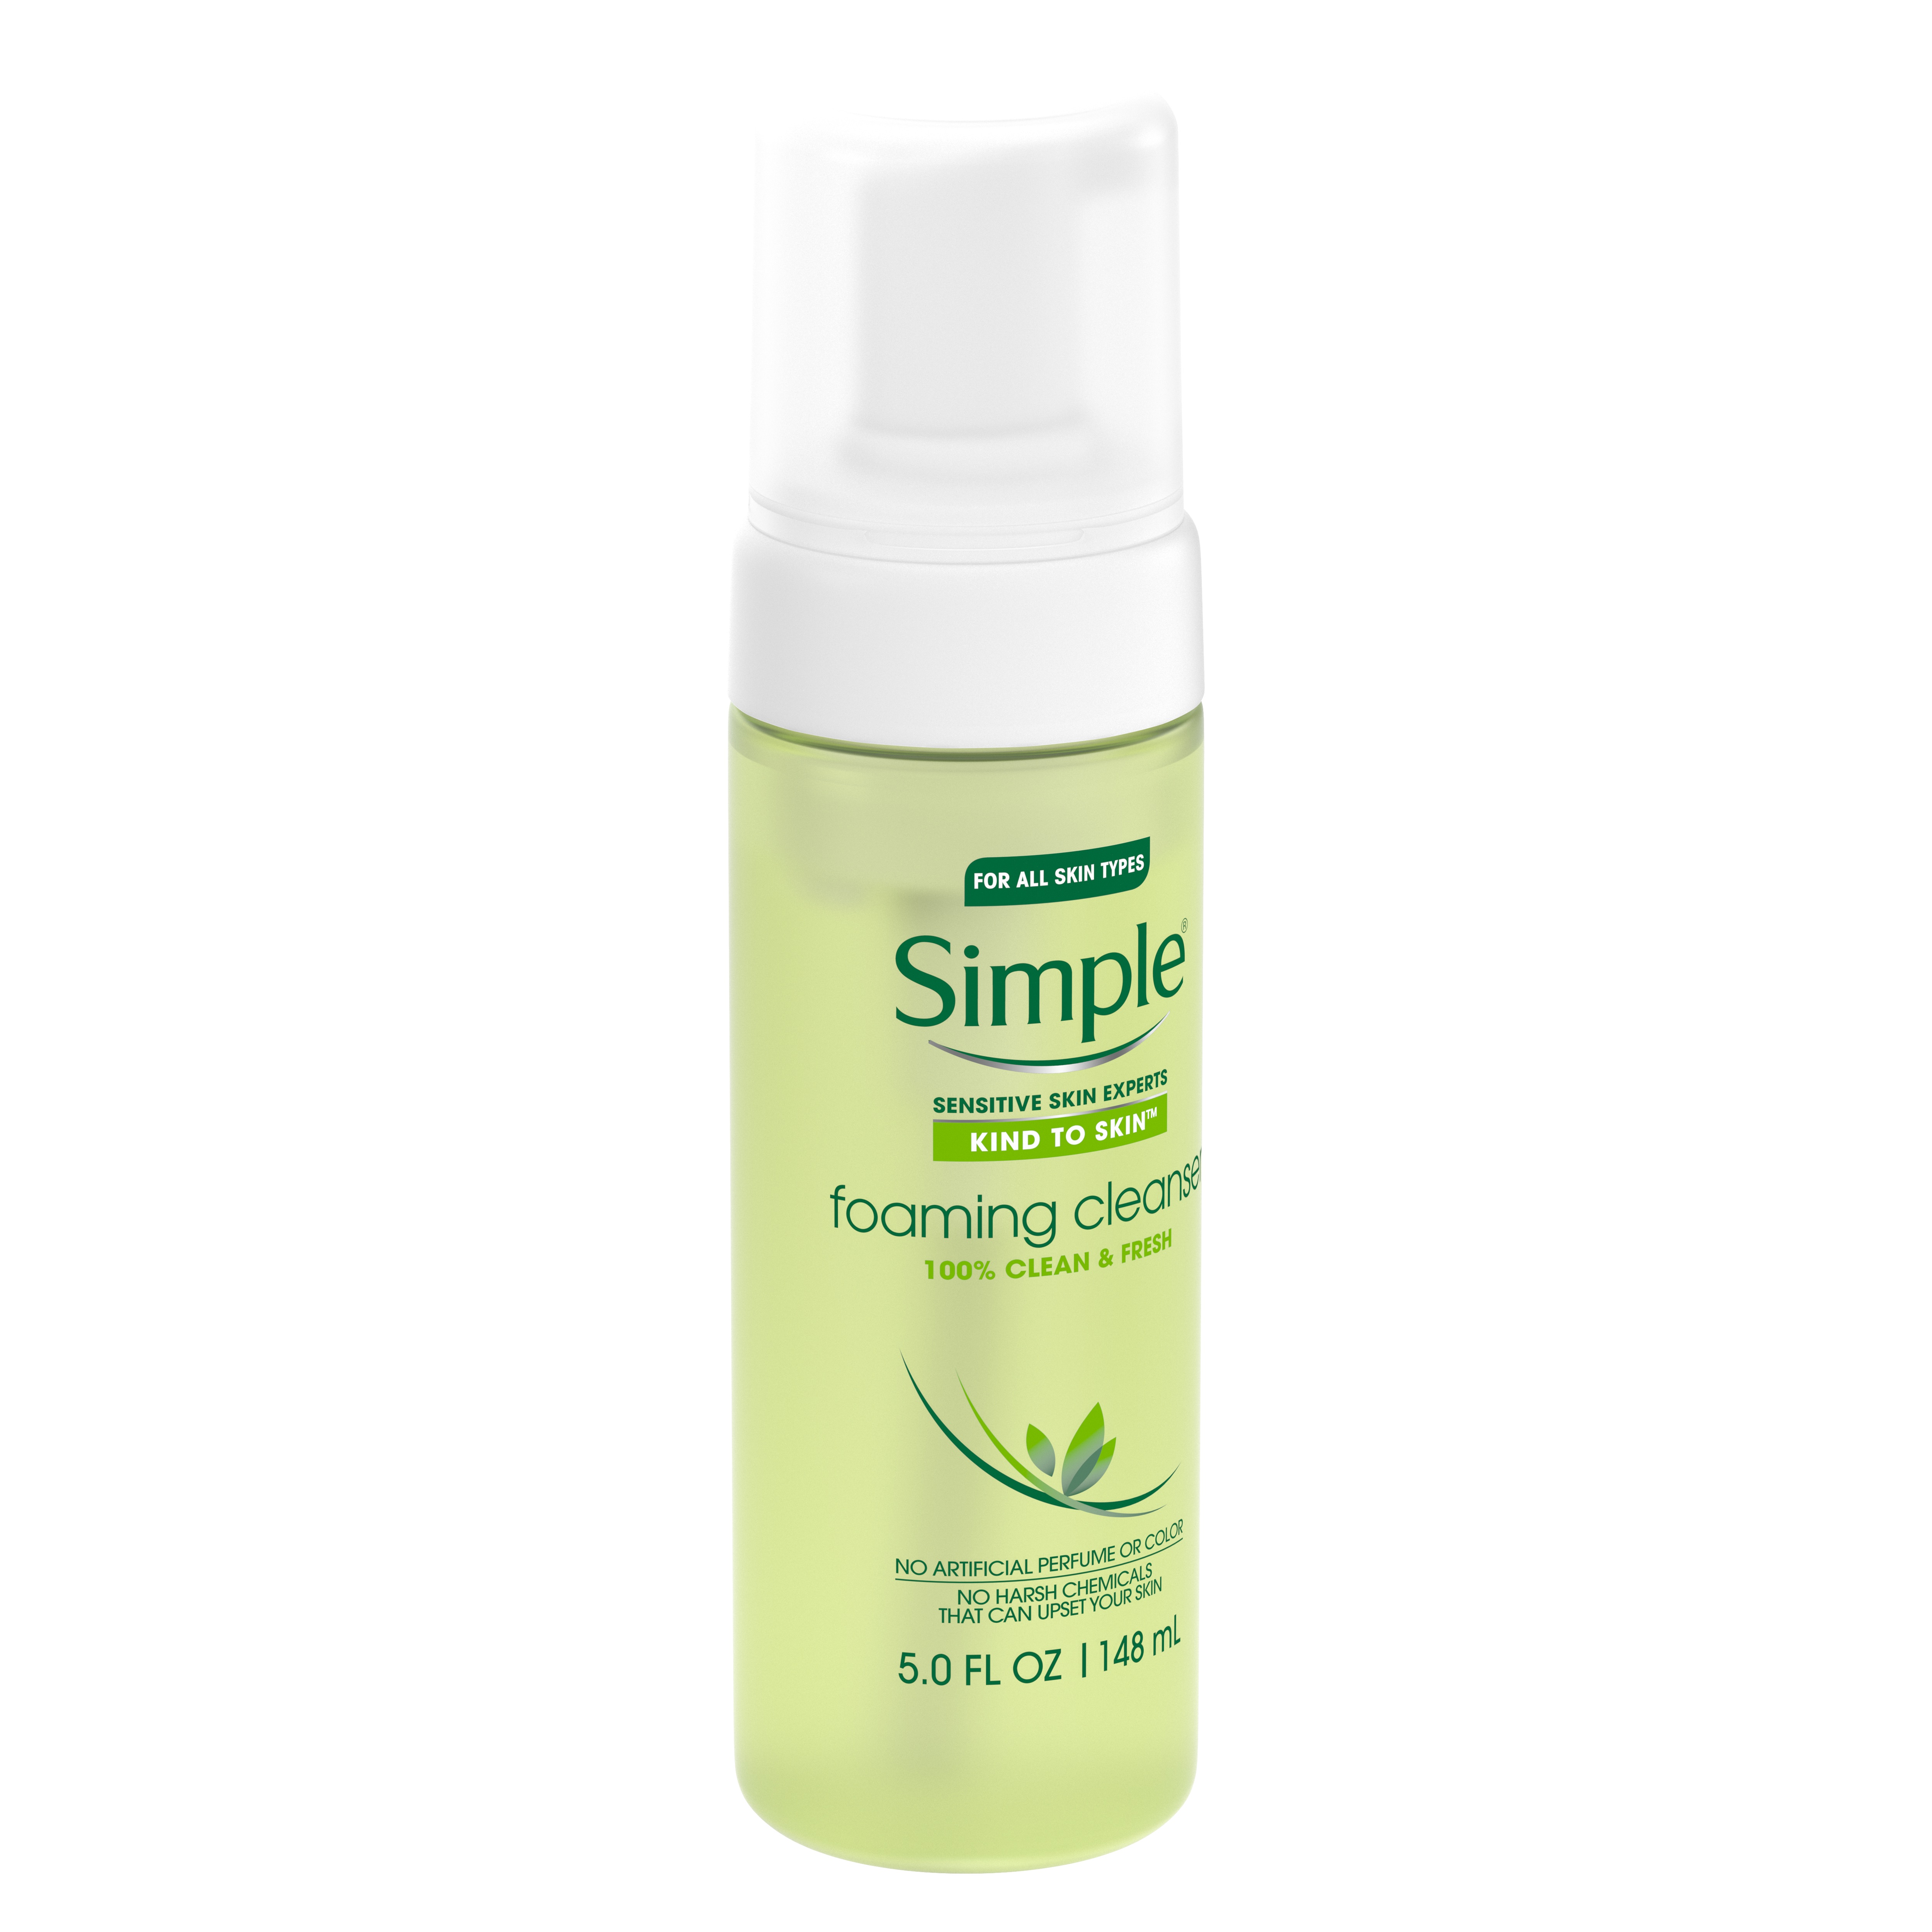 Simple Foaming Facial Cleanser 5 oz - image 4 of 10